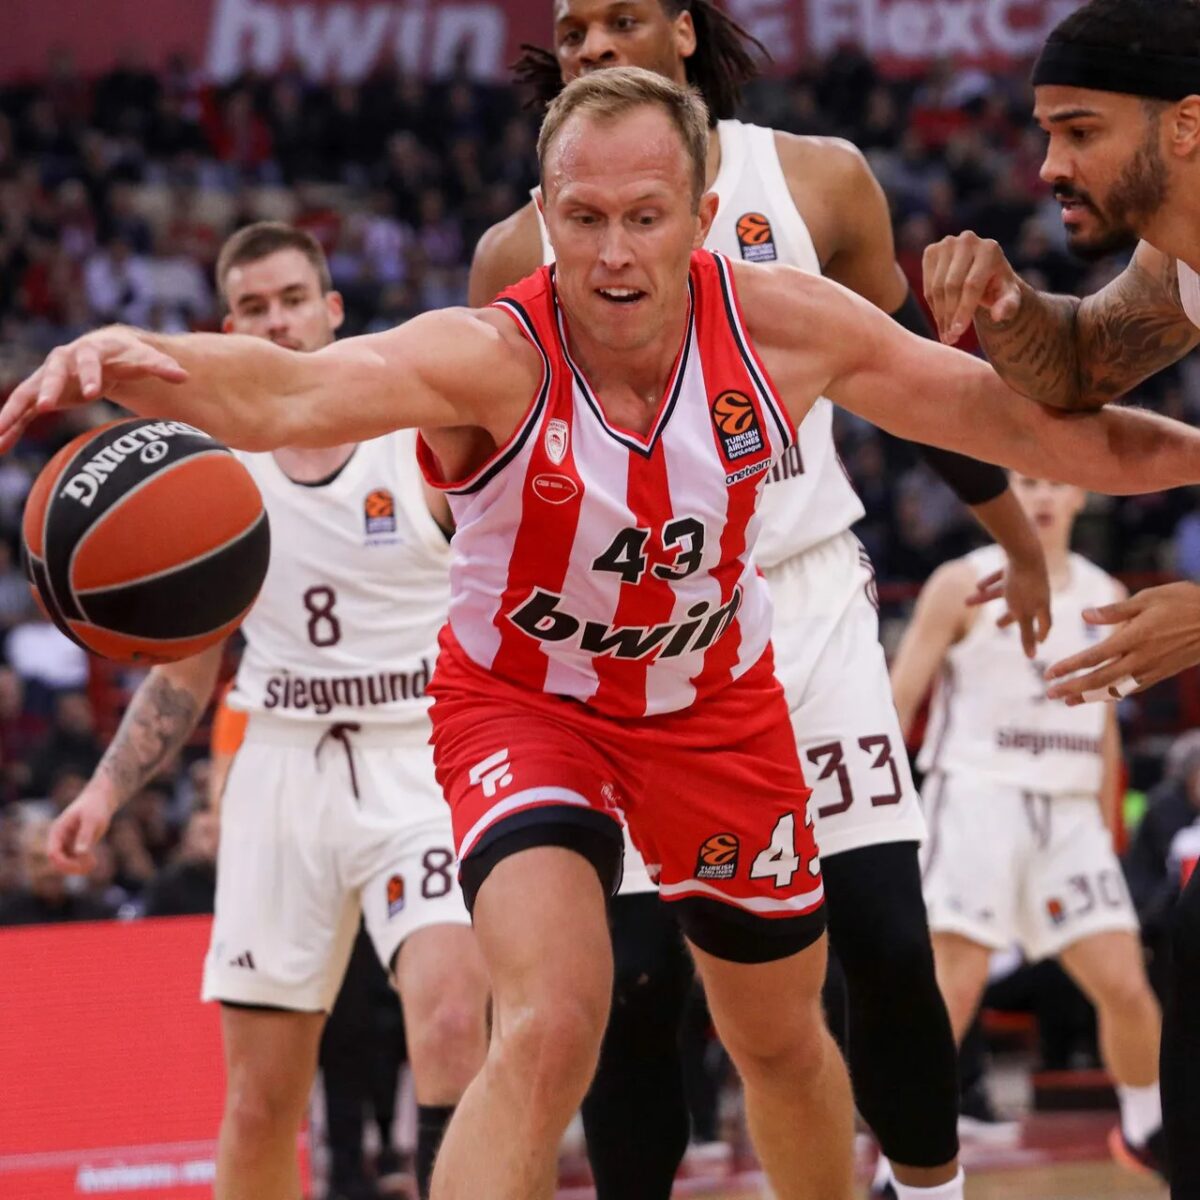 It's a must-win game in Euroleague Basketball for both sides as FC Bayern Munich host Olympiacos.